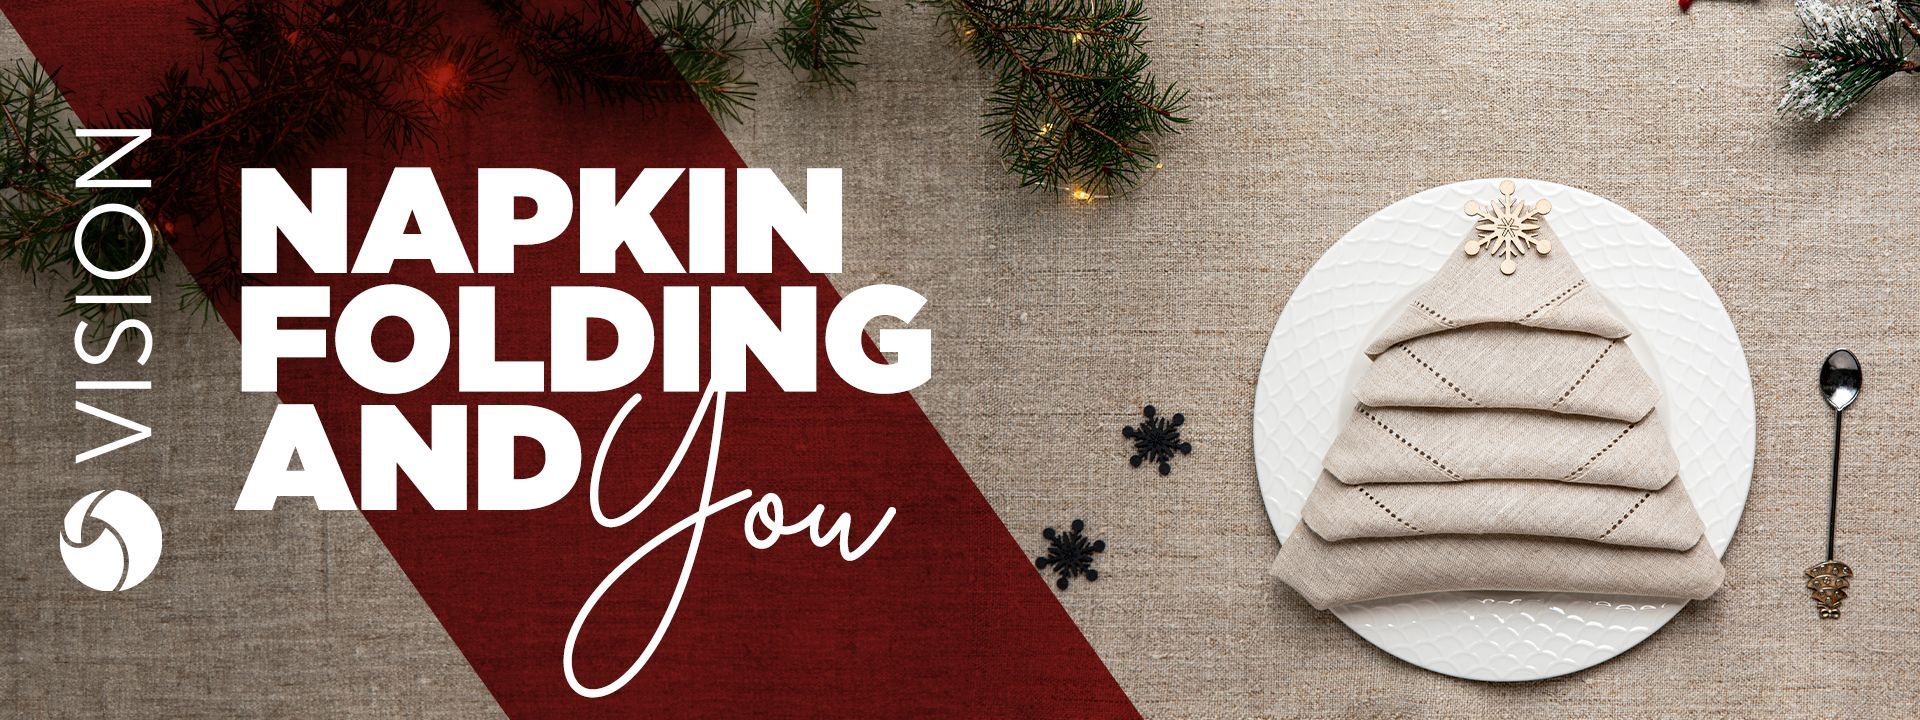 What Will Your Christmas Napkin Say About You This Christmas?